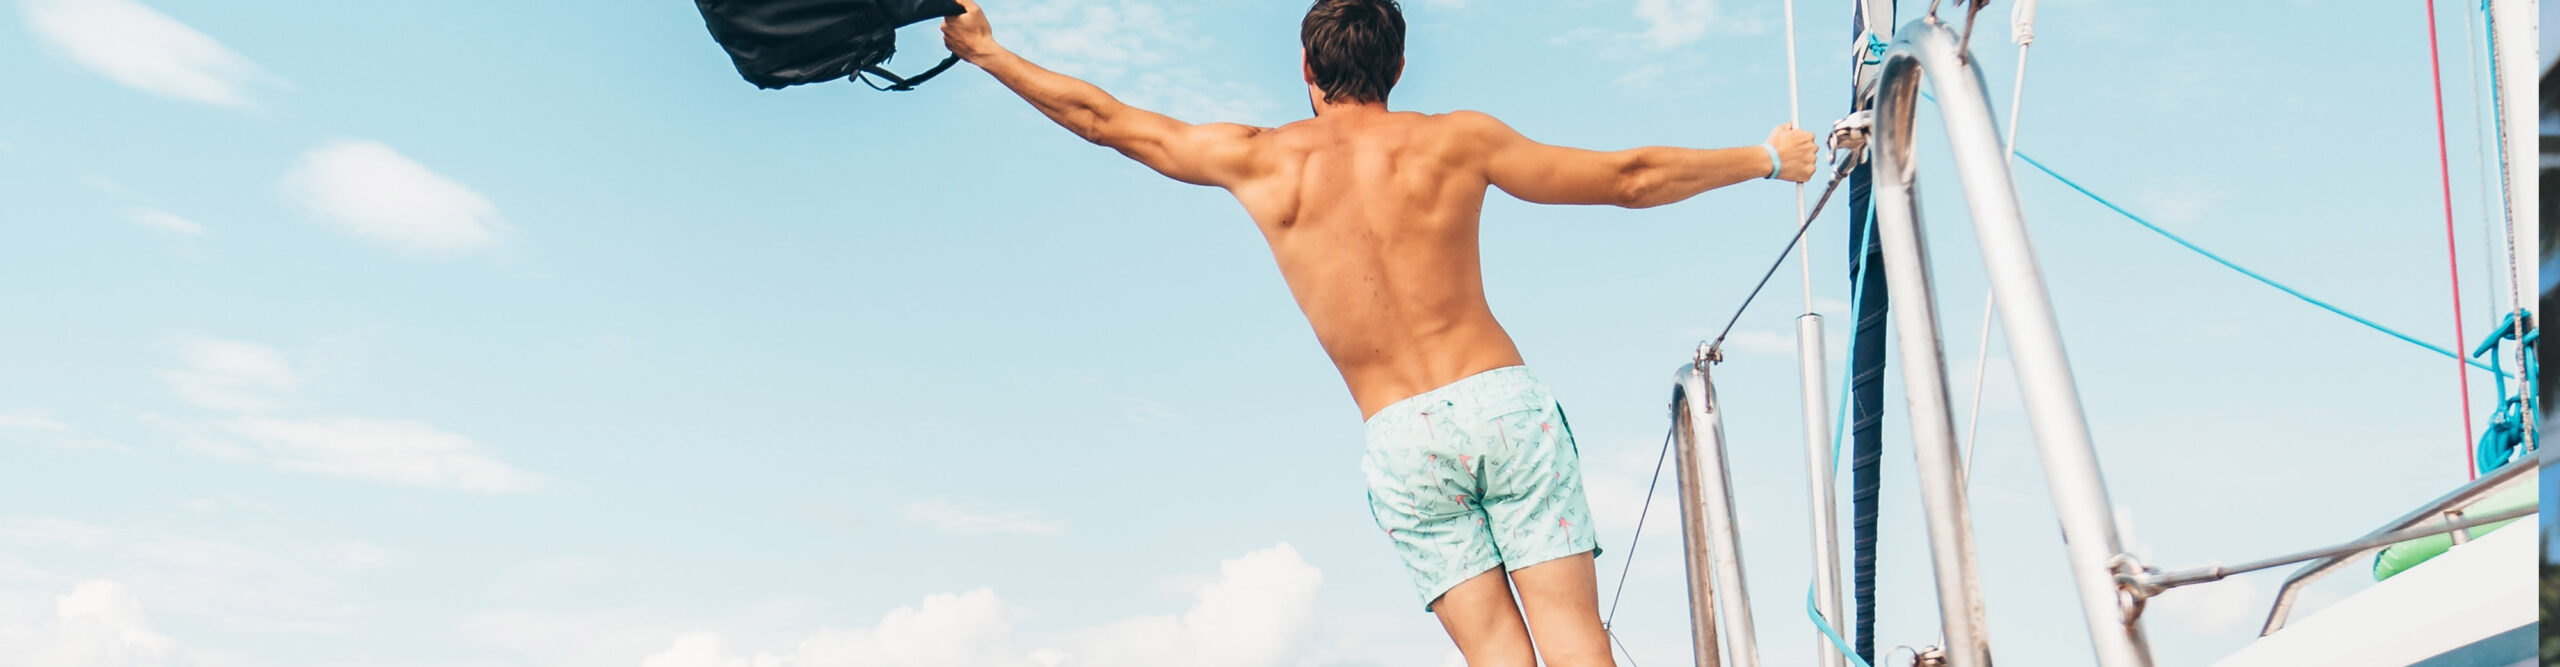 Summer ready with laser hair removal for men and women